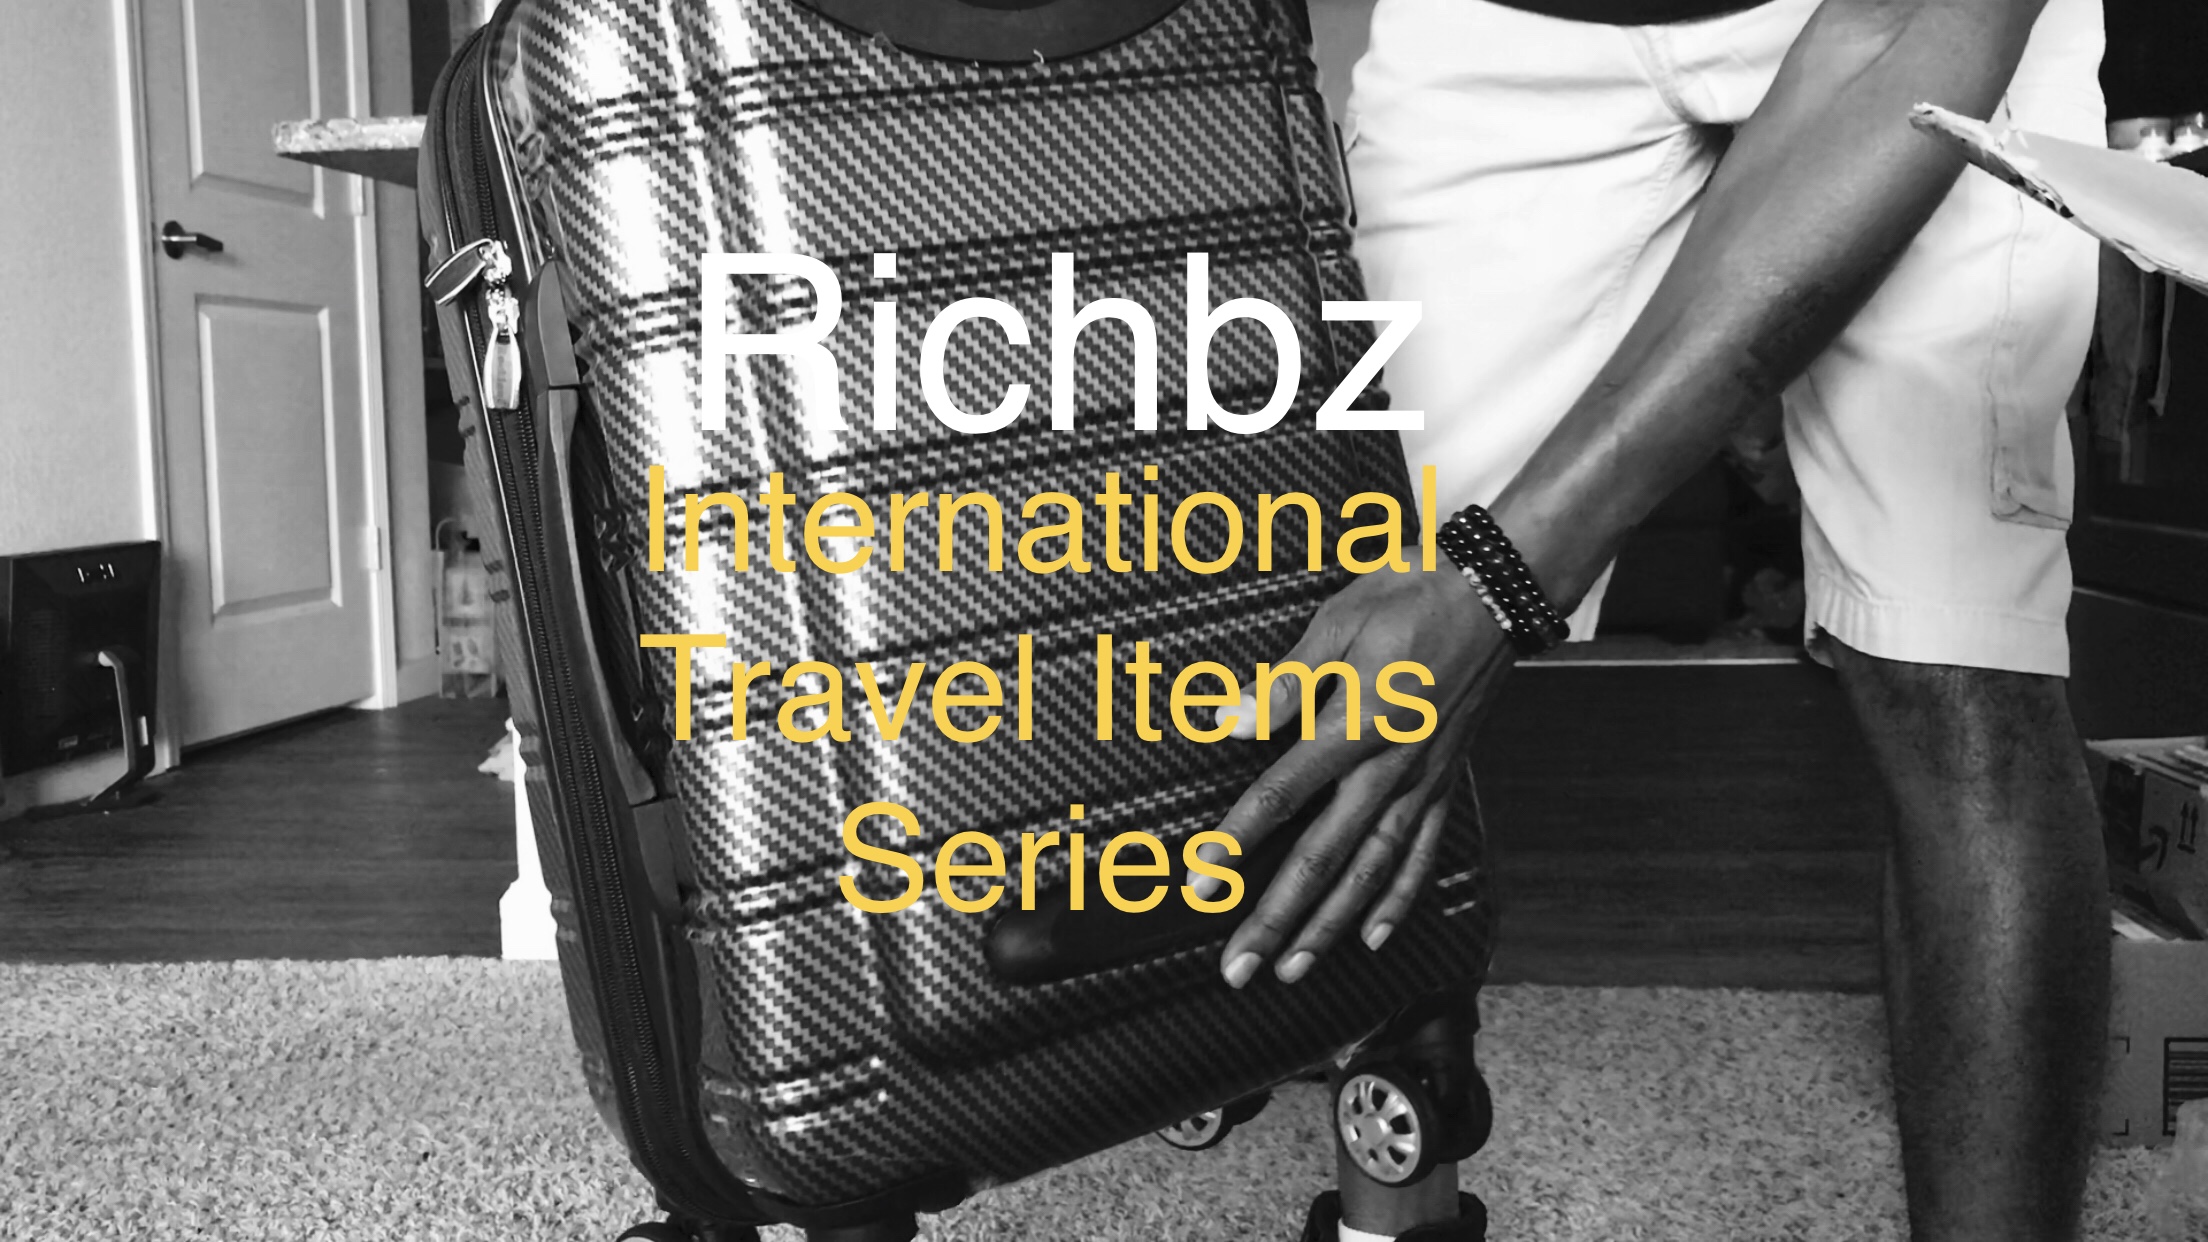 Richbz holding a Suitcase